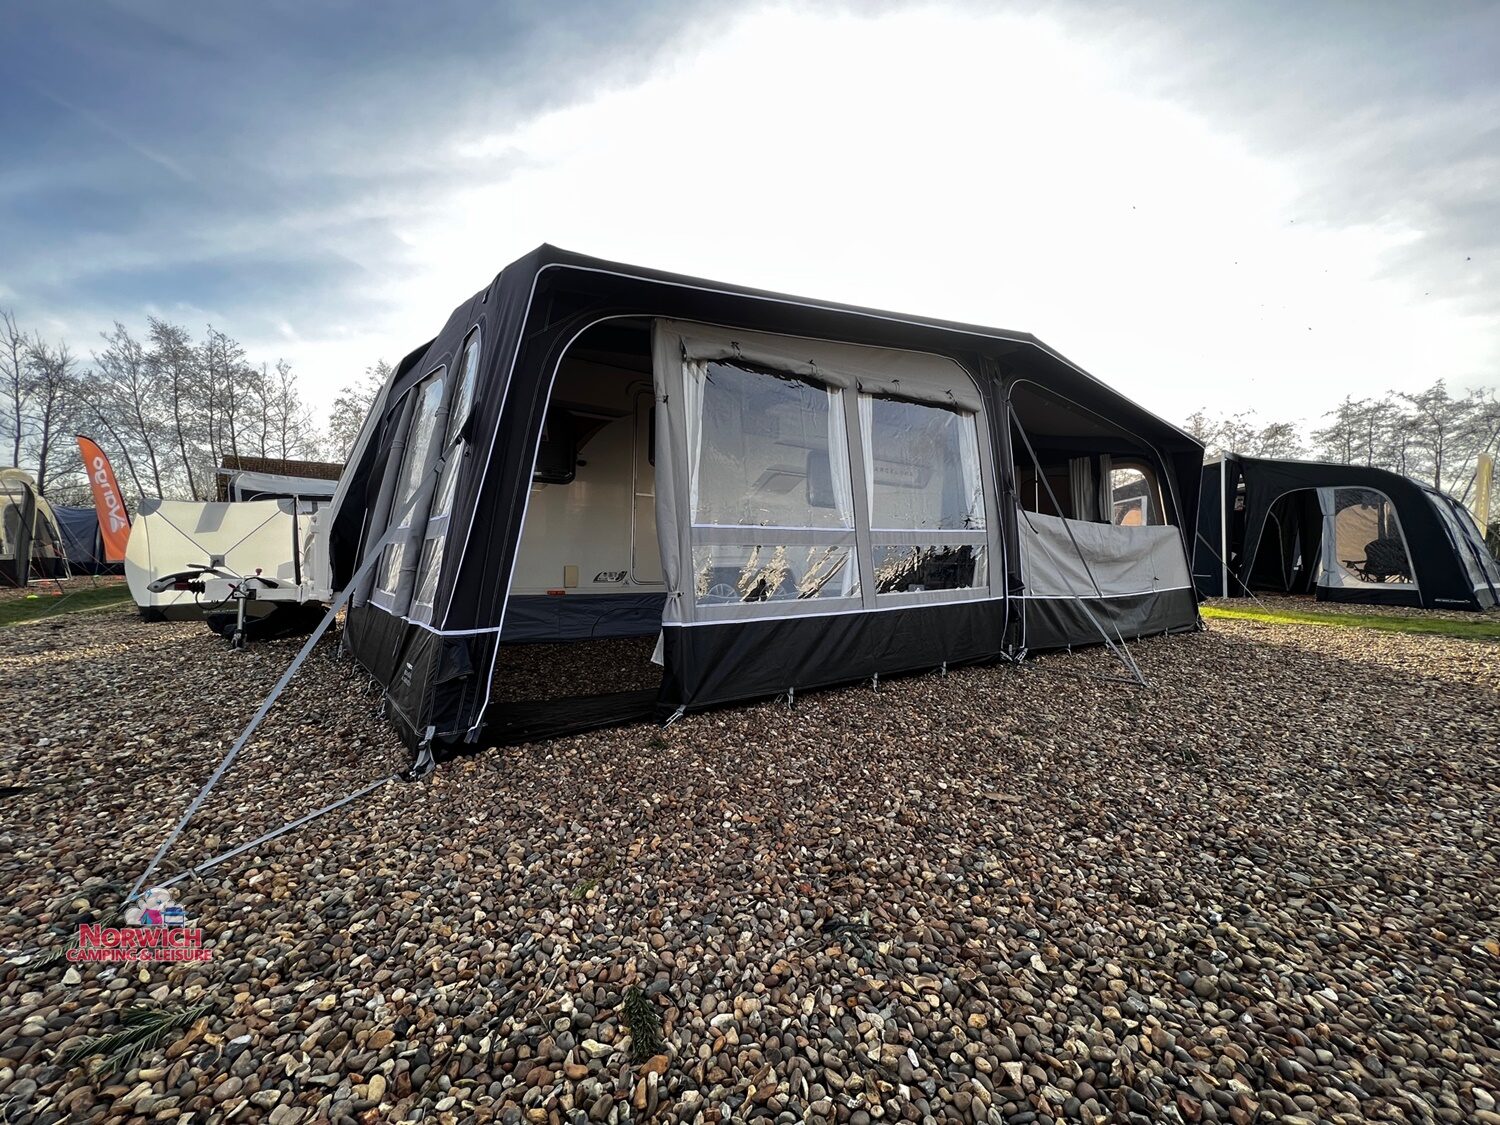 Dometic Residence All Season Awning On A Bailey Caravan At Norwich Camping 2